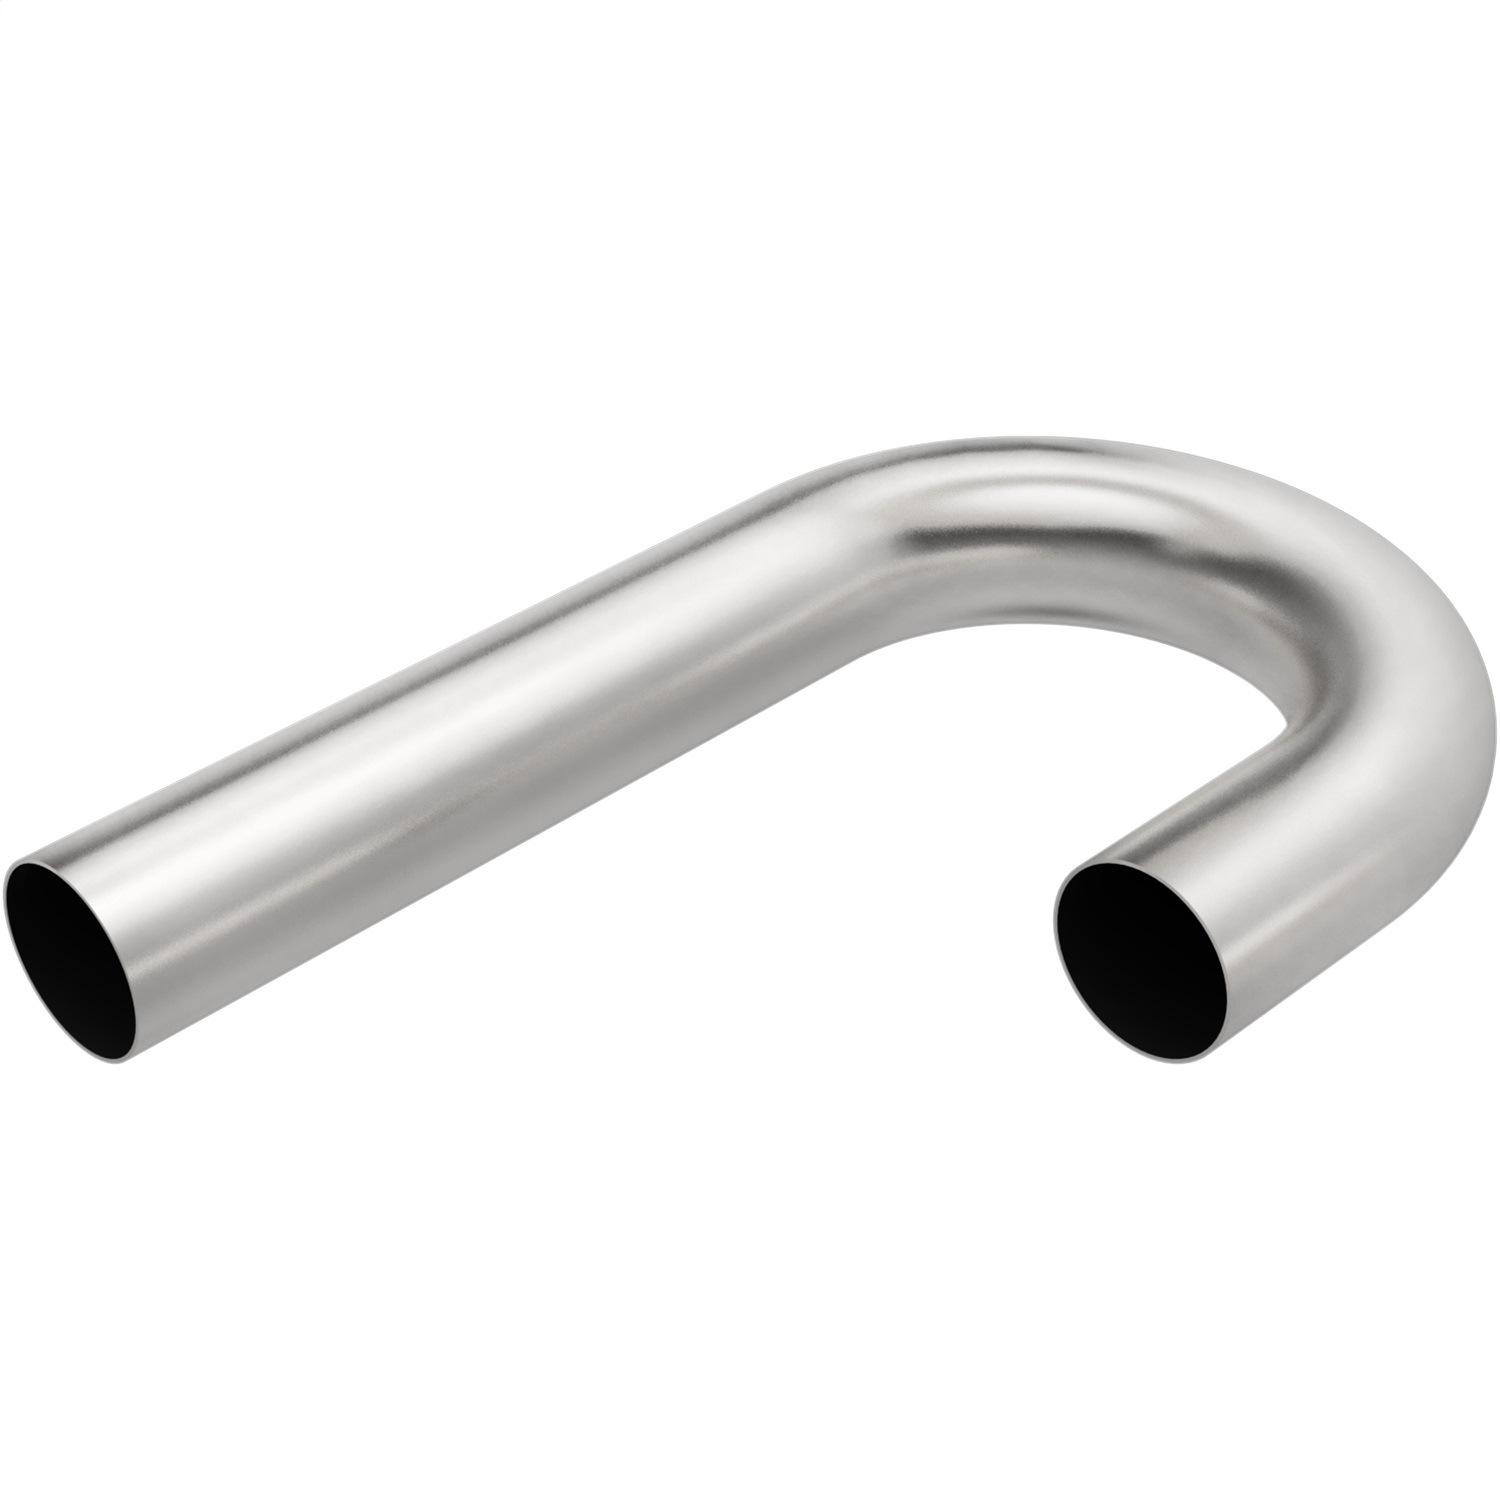 Magnaflow Performance Exhaust Magnaflow Performance Exhaust 10716 Smooth Transitions Exhaust Pipe